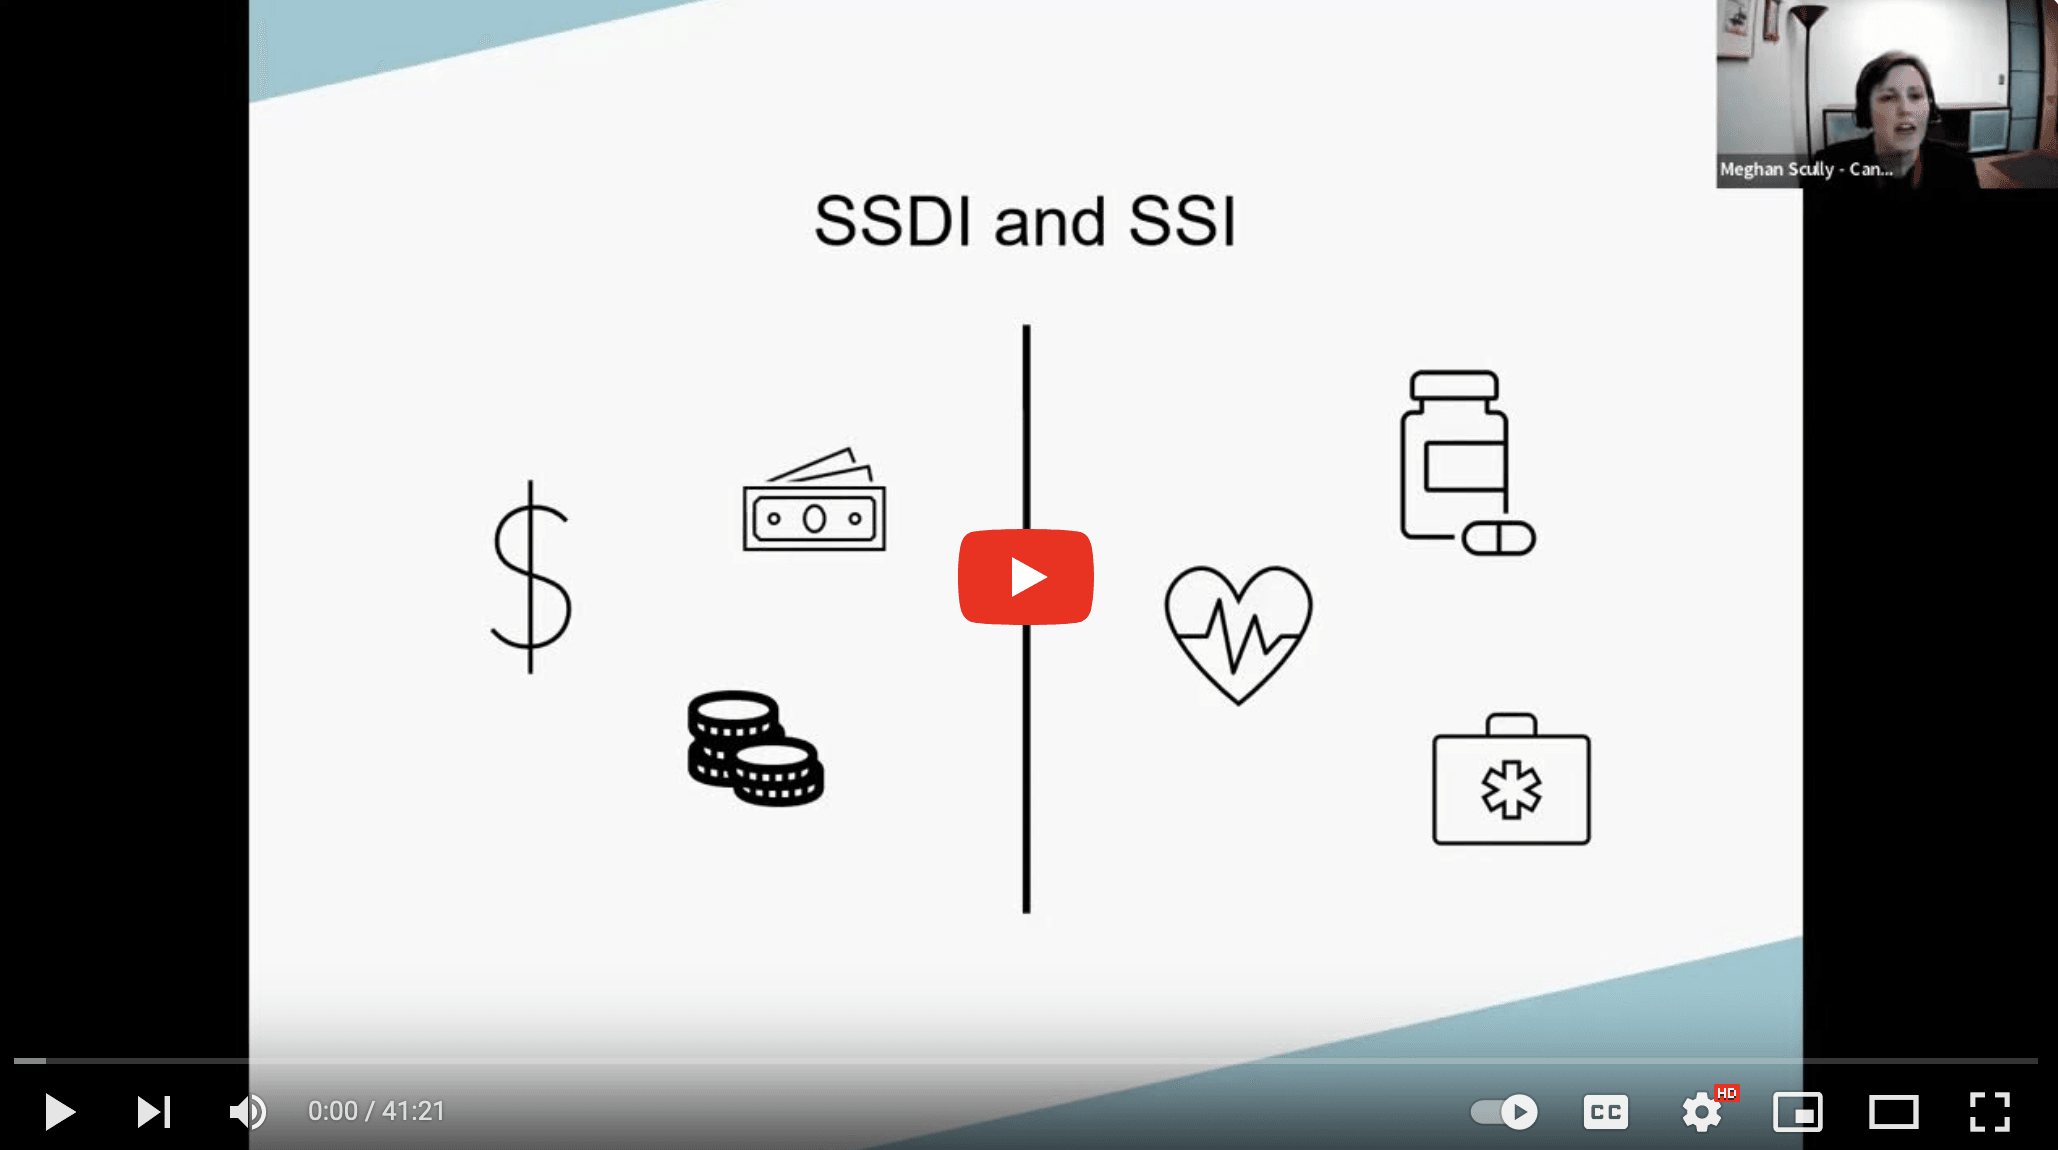 SSDI and SSI: What you need to know